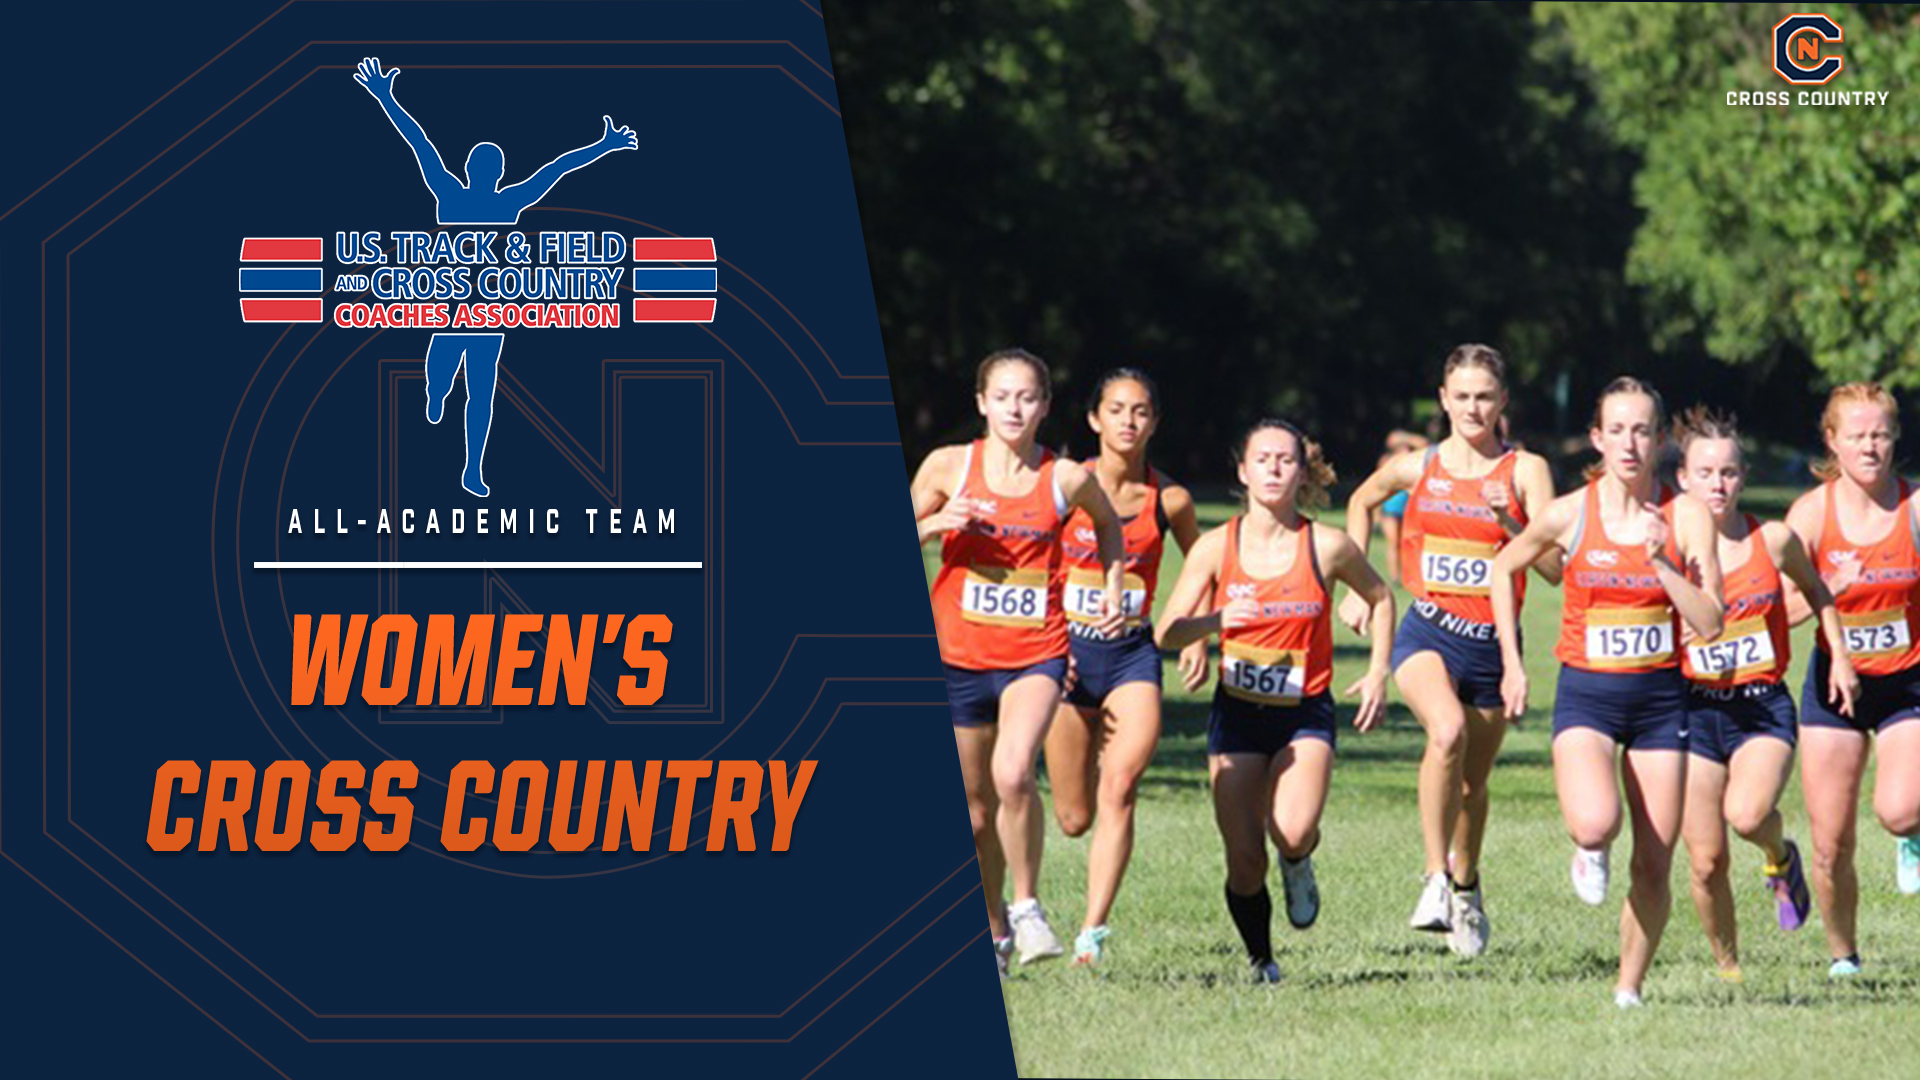 Both cross country squads earn USTFCCCA All-Academic honors